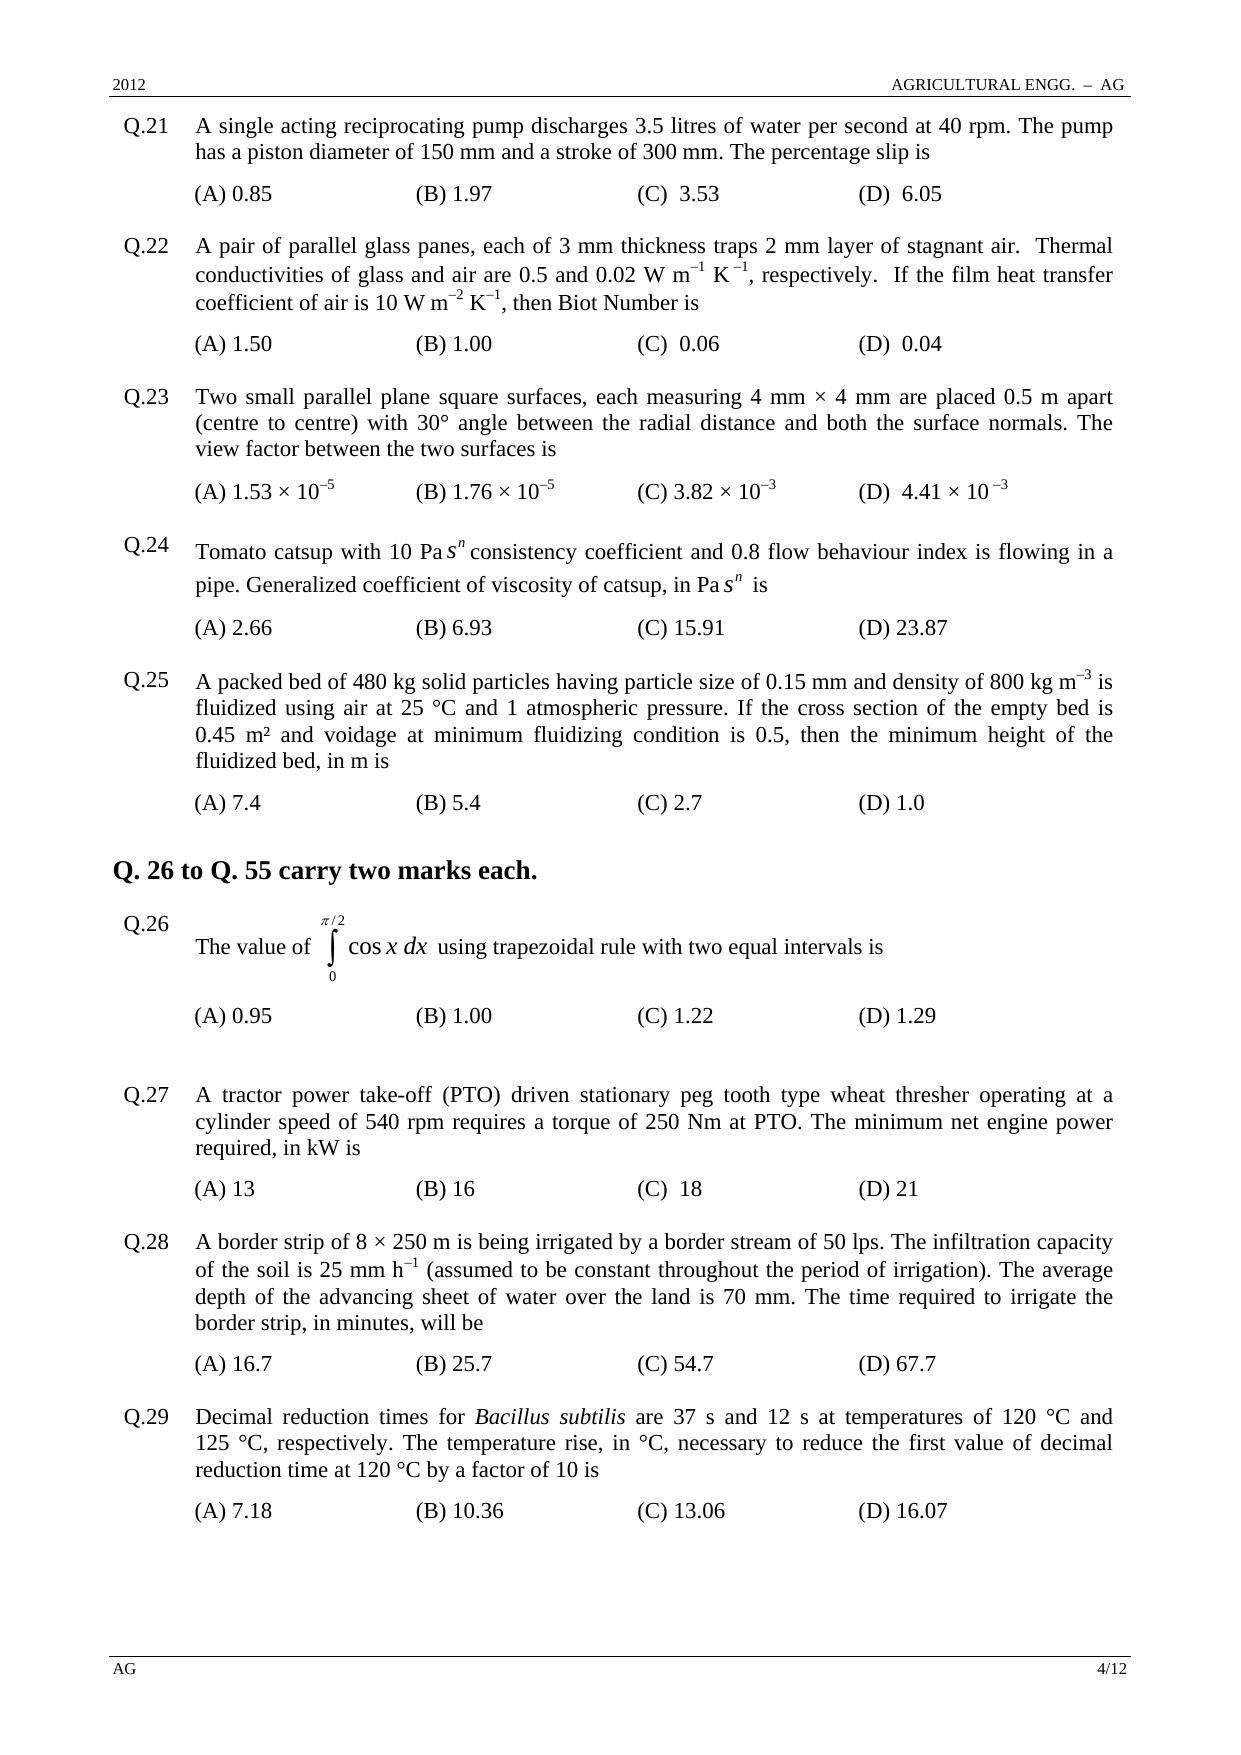 GATE 2012 Agricultural Engineering (AG) Question Paper with Answer Key - Page 4